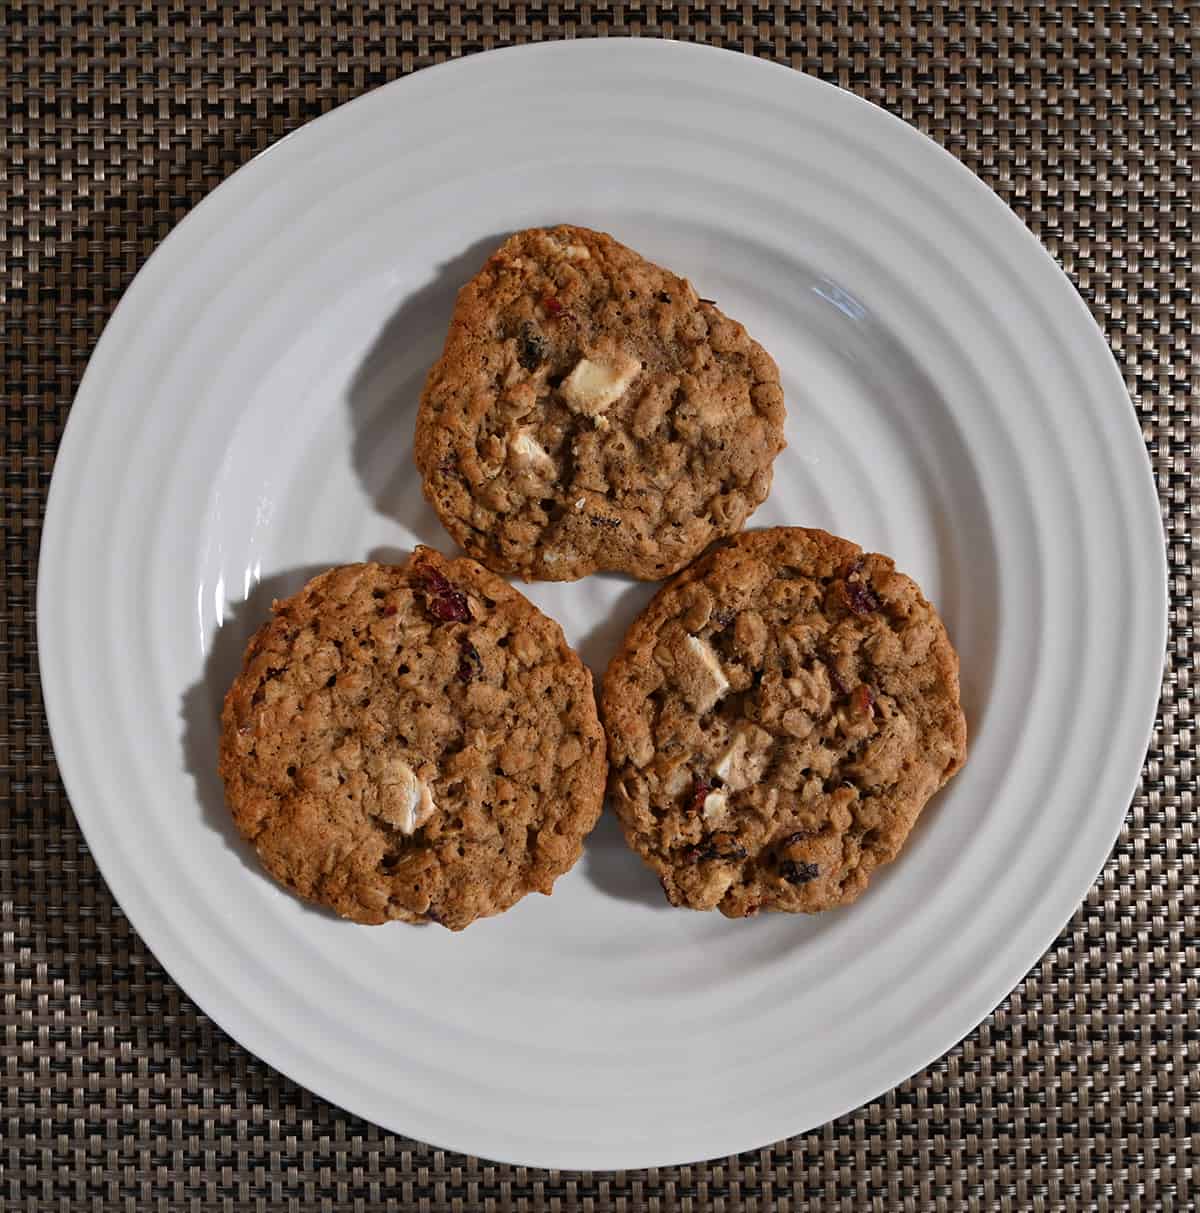 Top down image of three cookies served on a white plate.